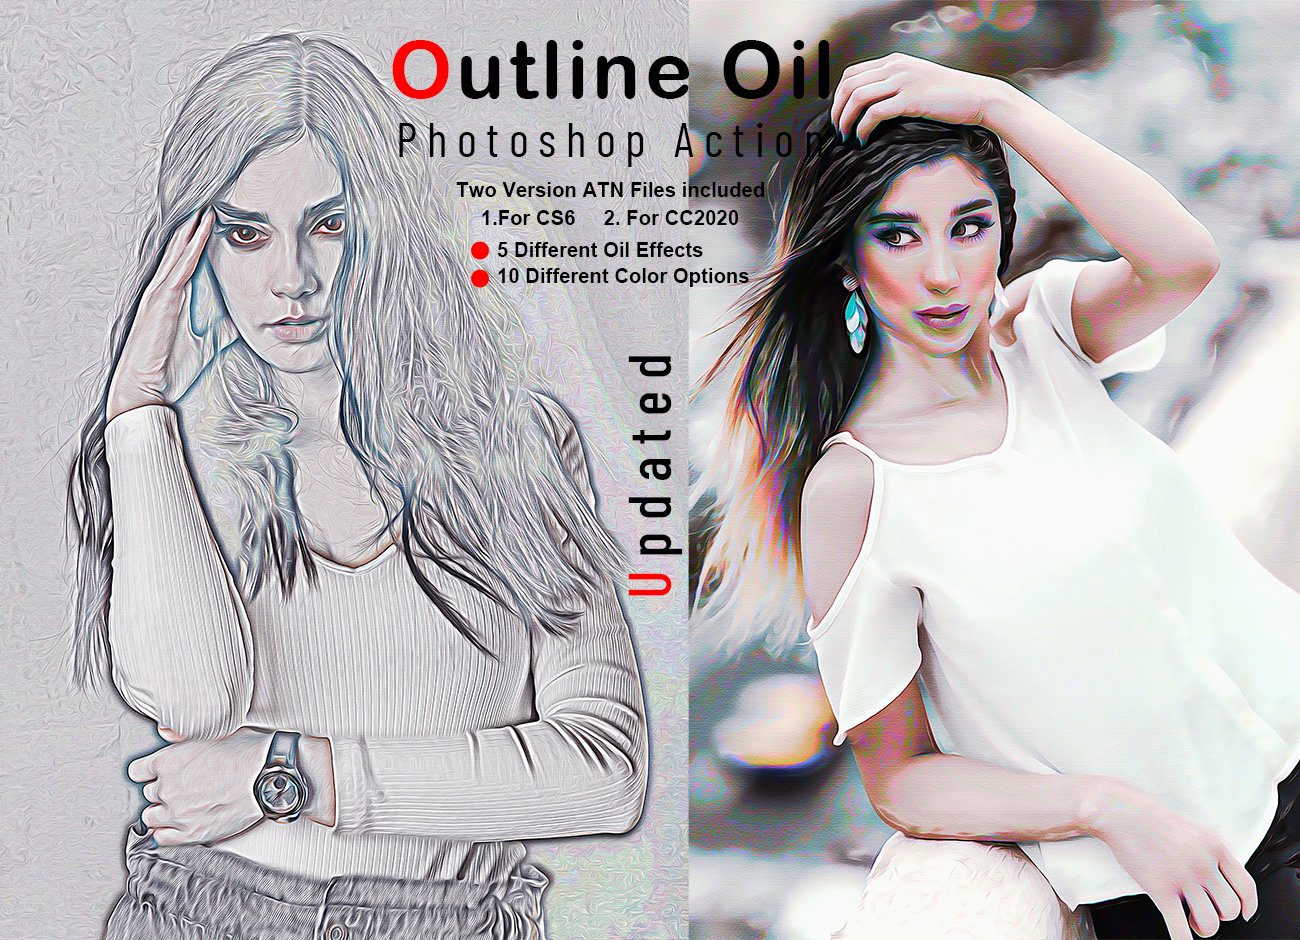 Outline Oil Photoshop Actioncover image.